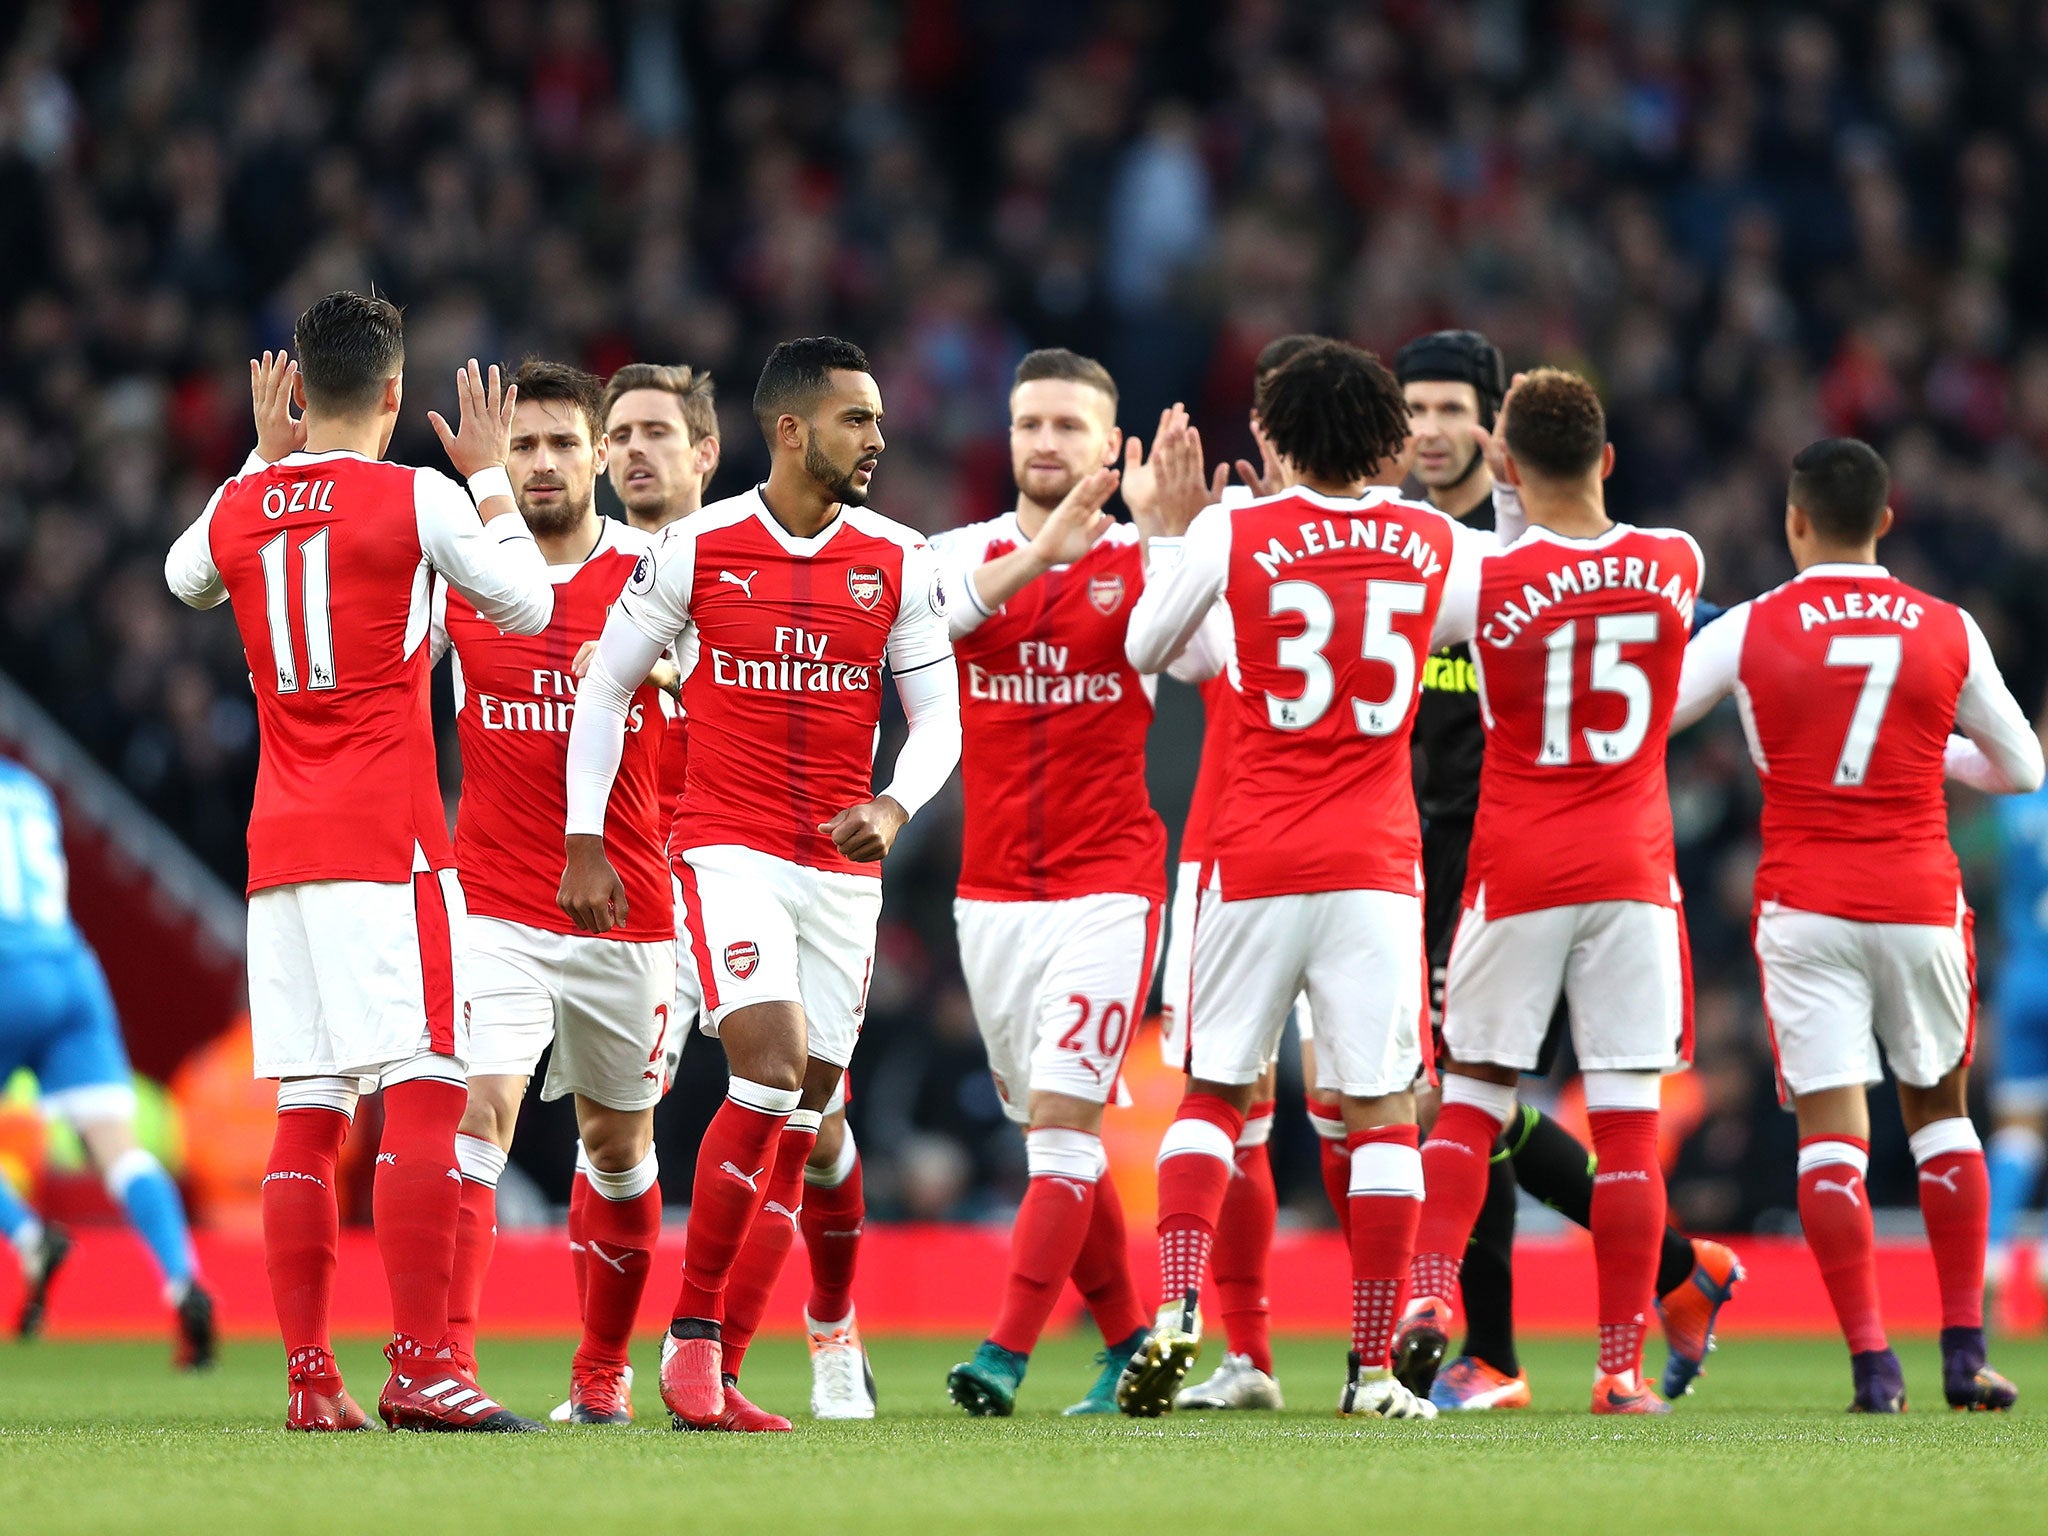 Arsenal celebrate their victory over Bournemouth on Sunday to end November on a positive note